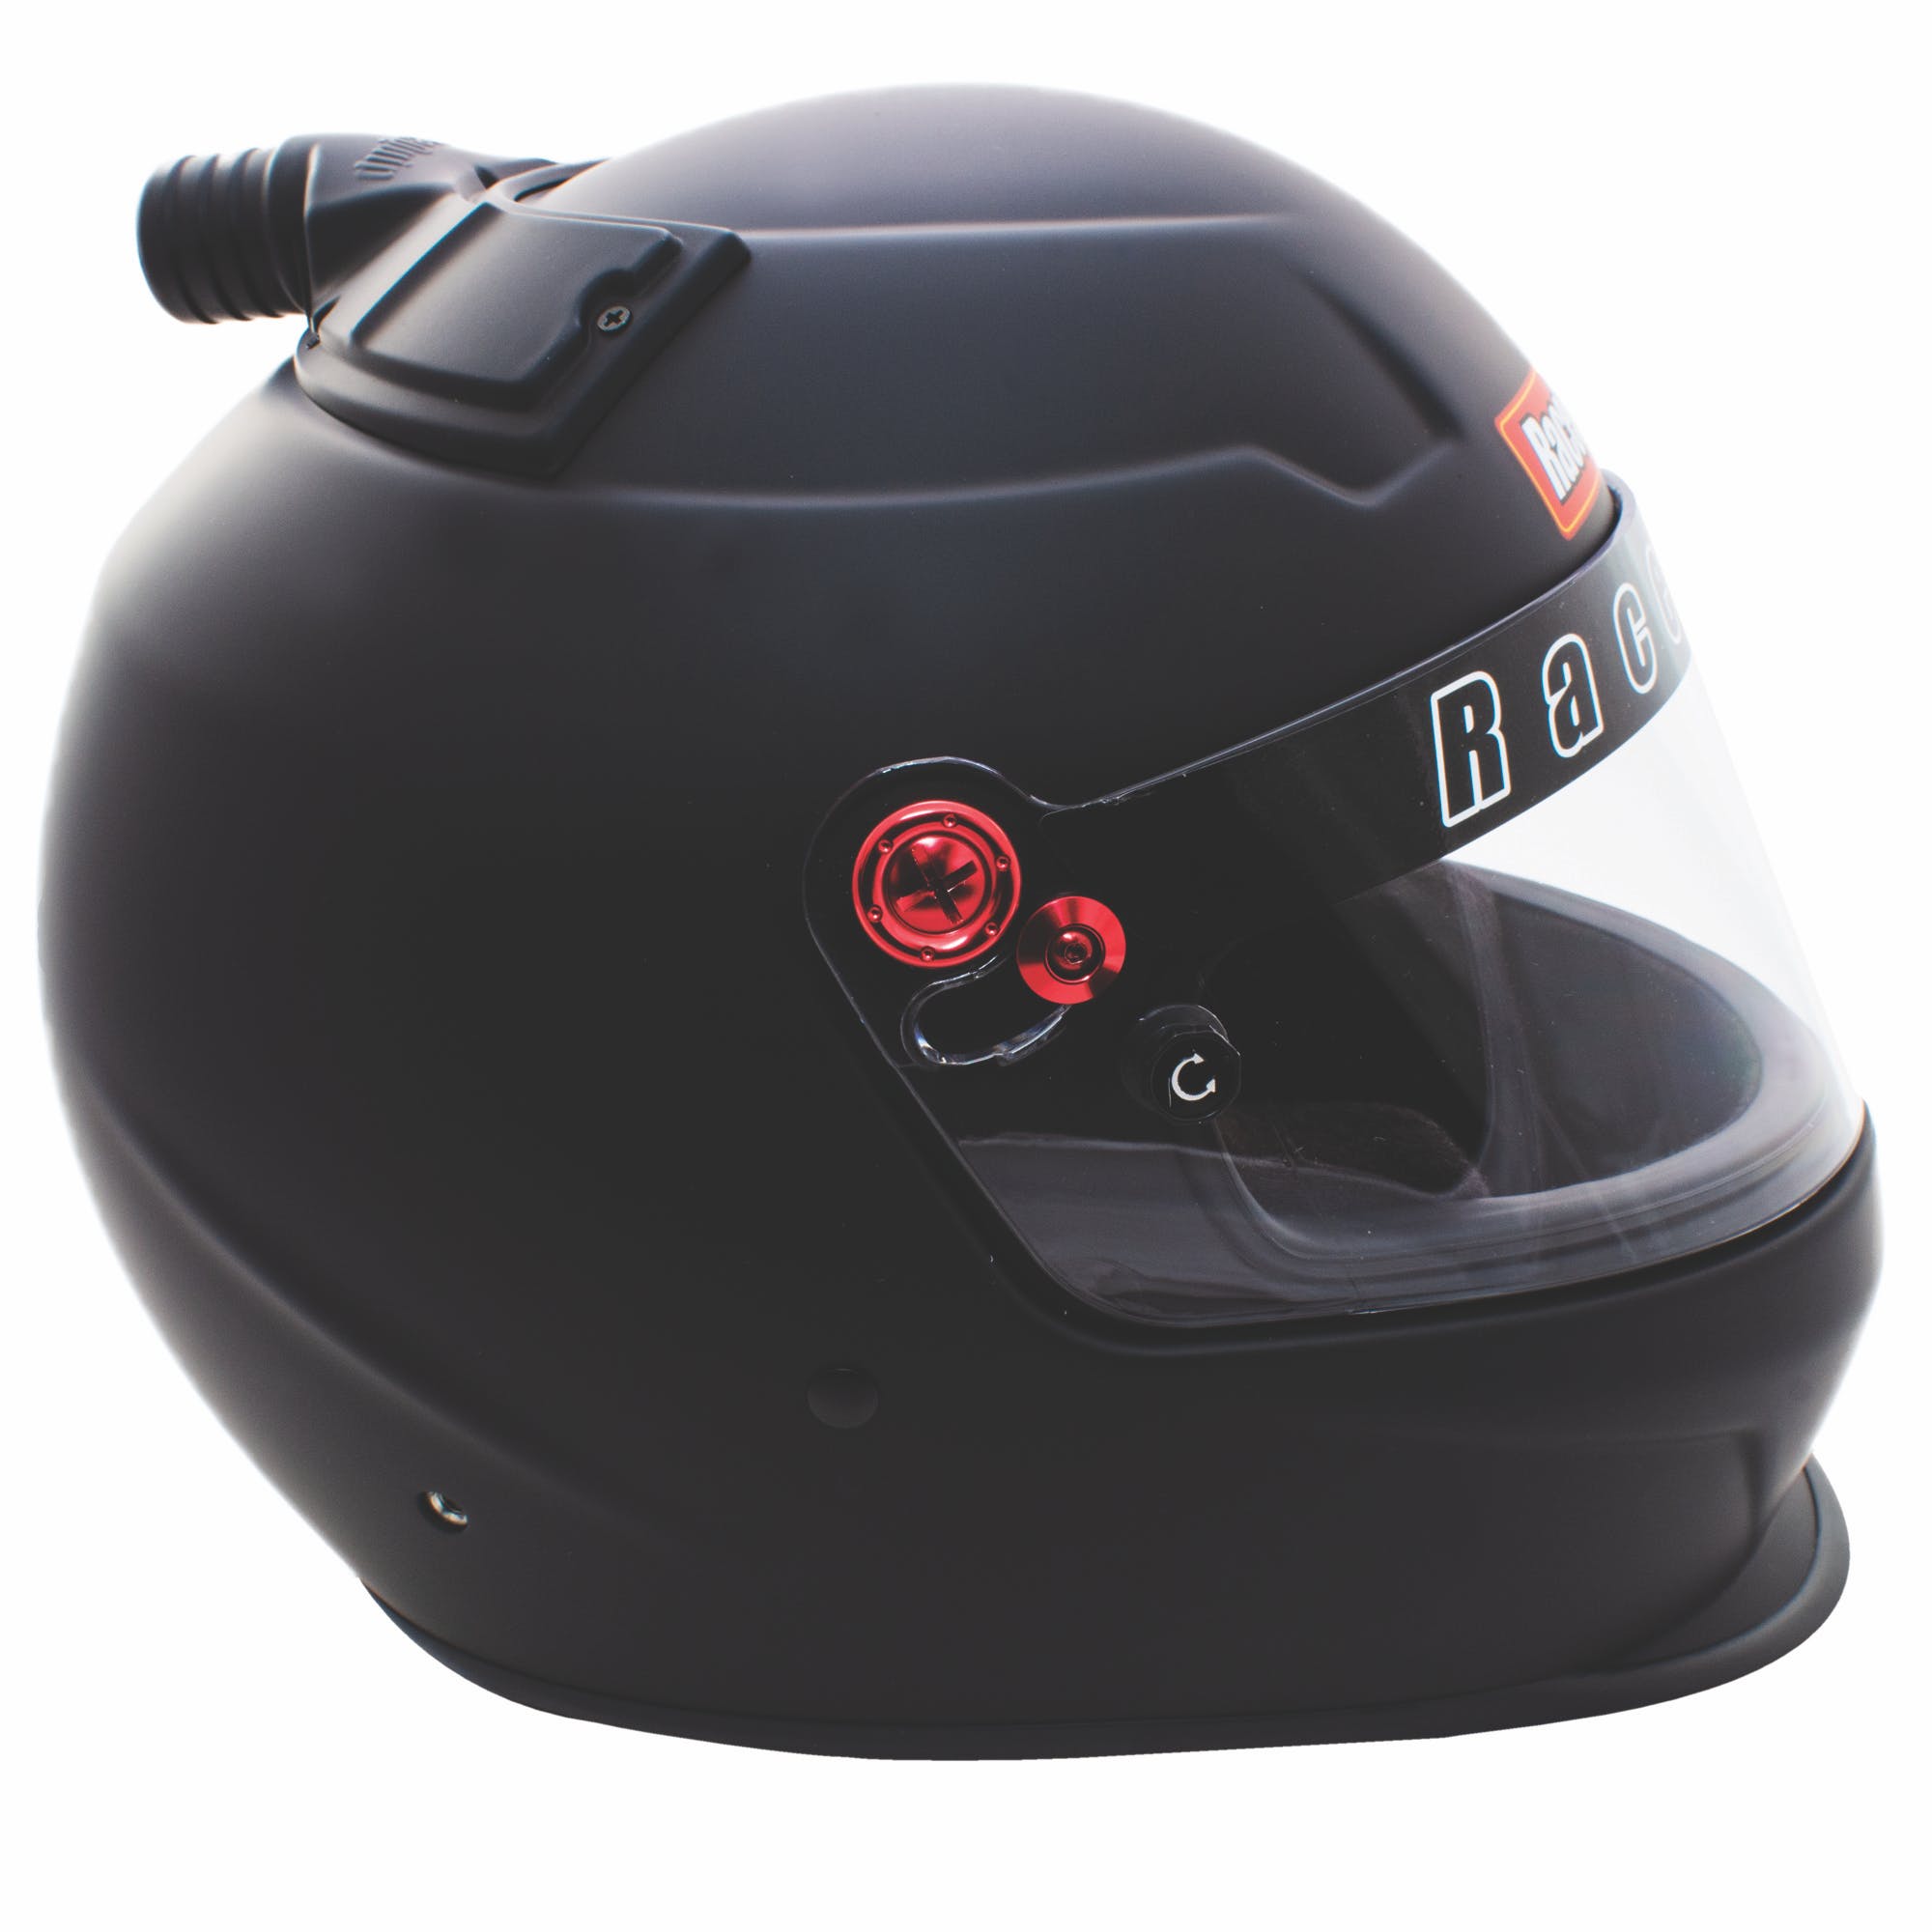 RaceQuip 266992 PRO20 Top Air Full Face Helmet Snell SA2020 Rated; Flat Black Small